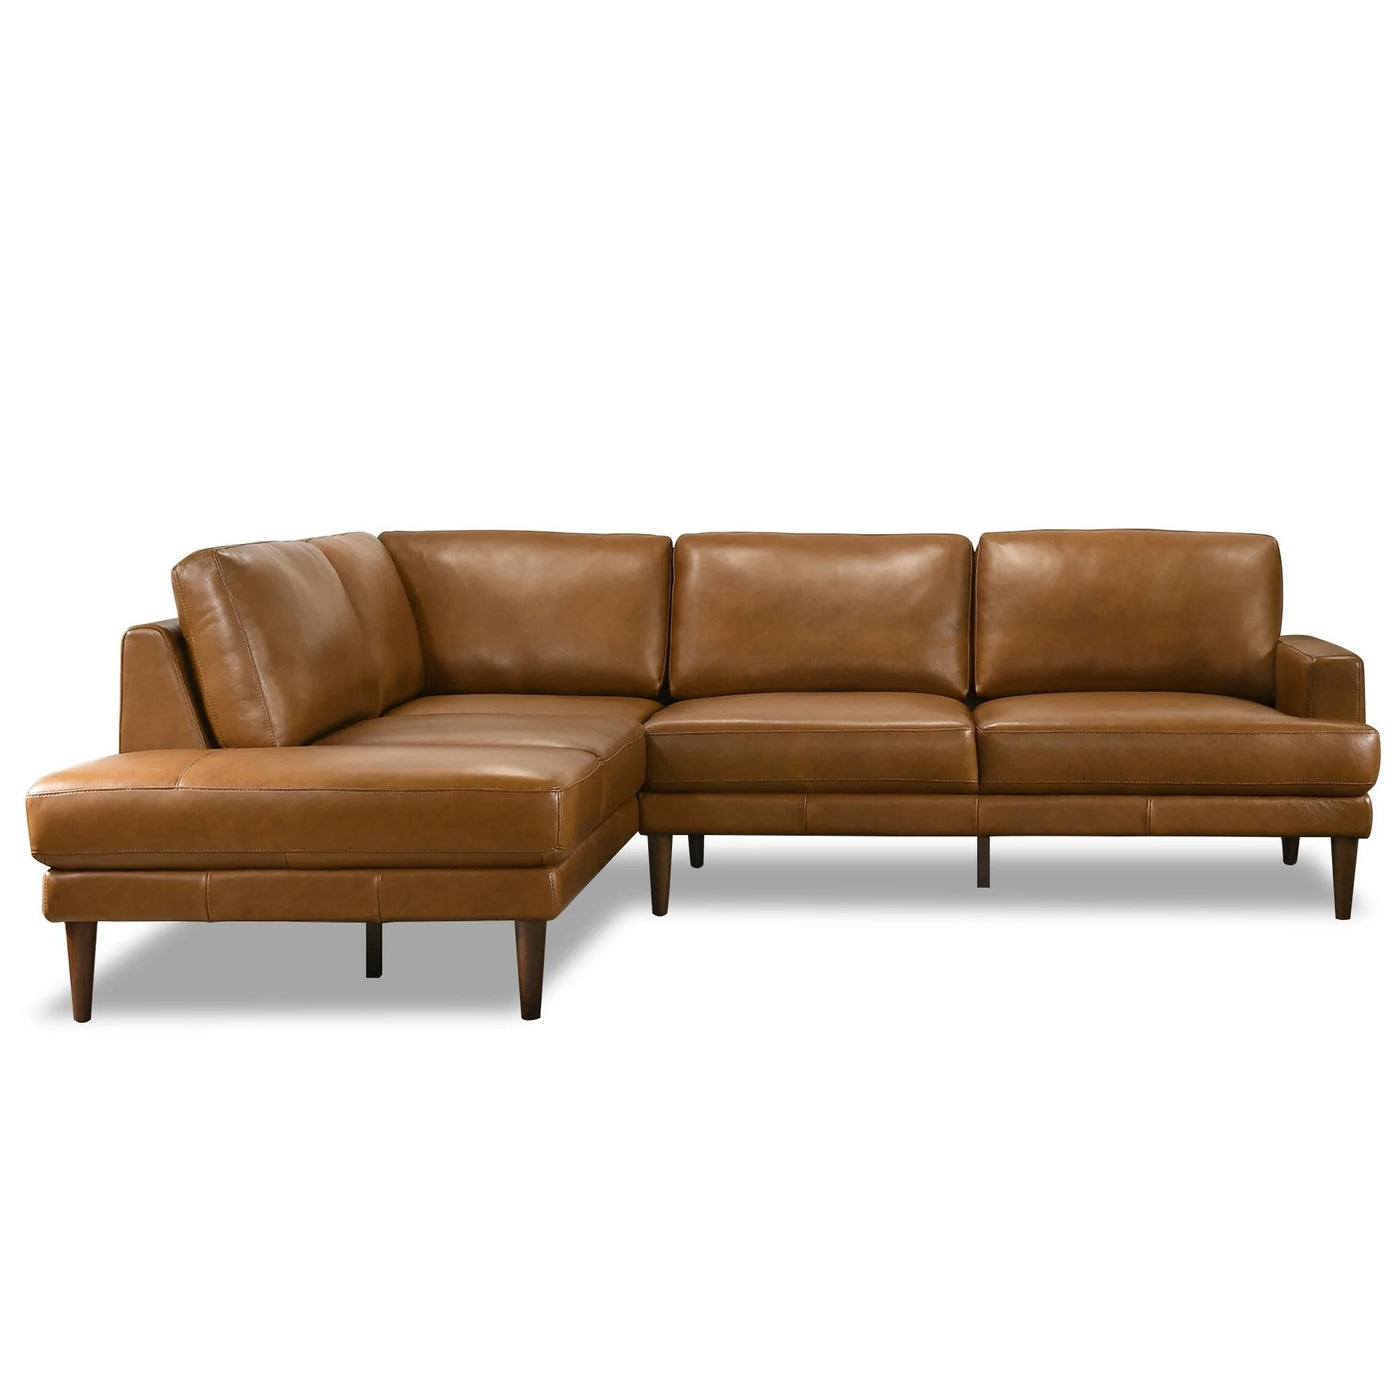 Mid-Century Modern Sectional Sofa in Tan Leather - Right Facing Chaise